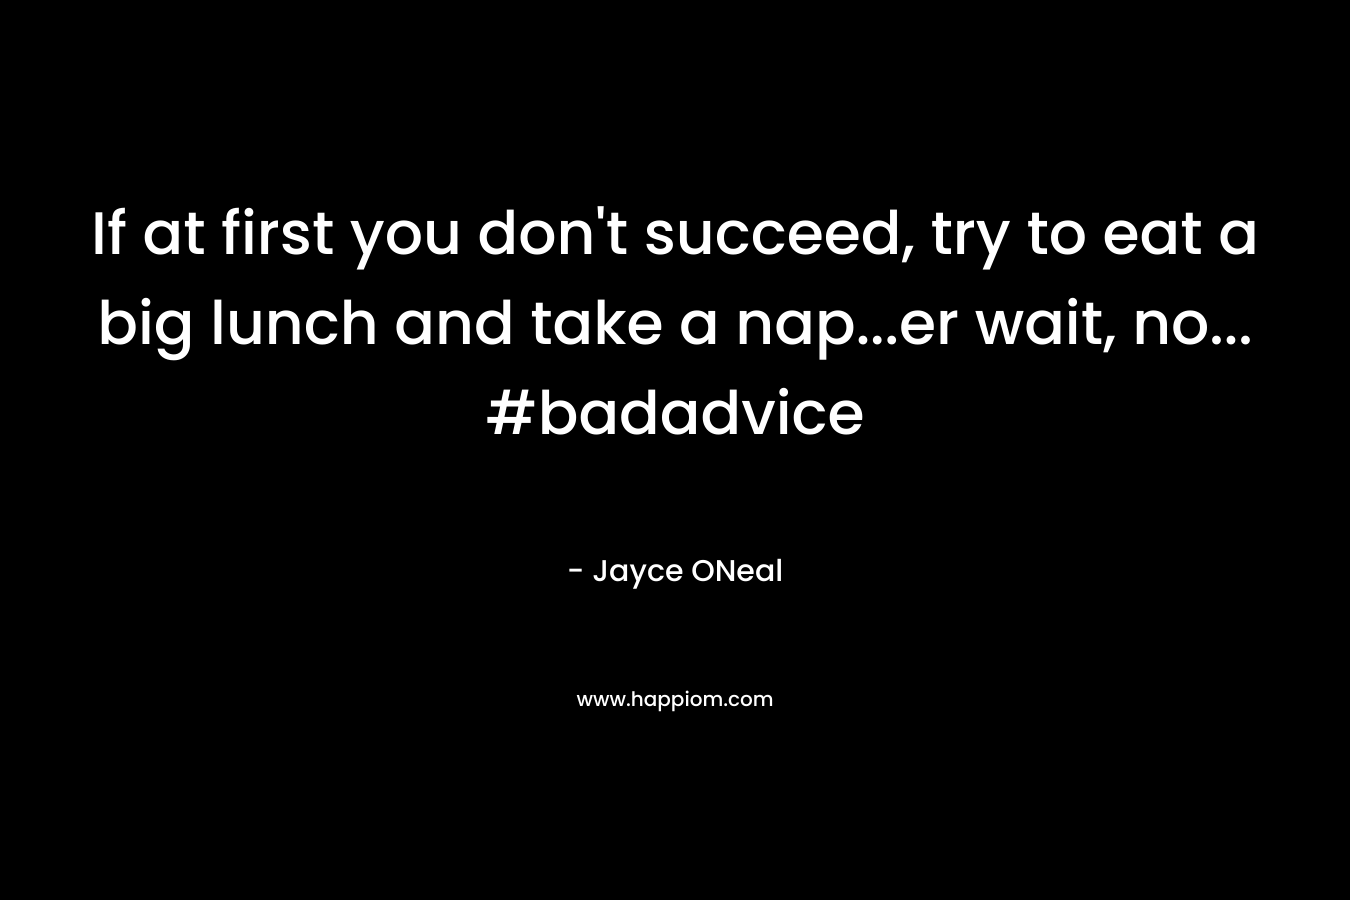 If at first you don't succeed, try to eat a big lunch and take a nap...er wait, no... #badadvice